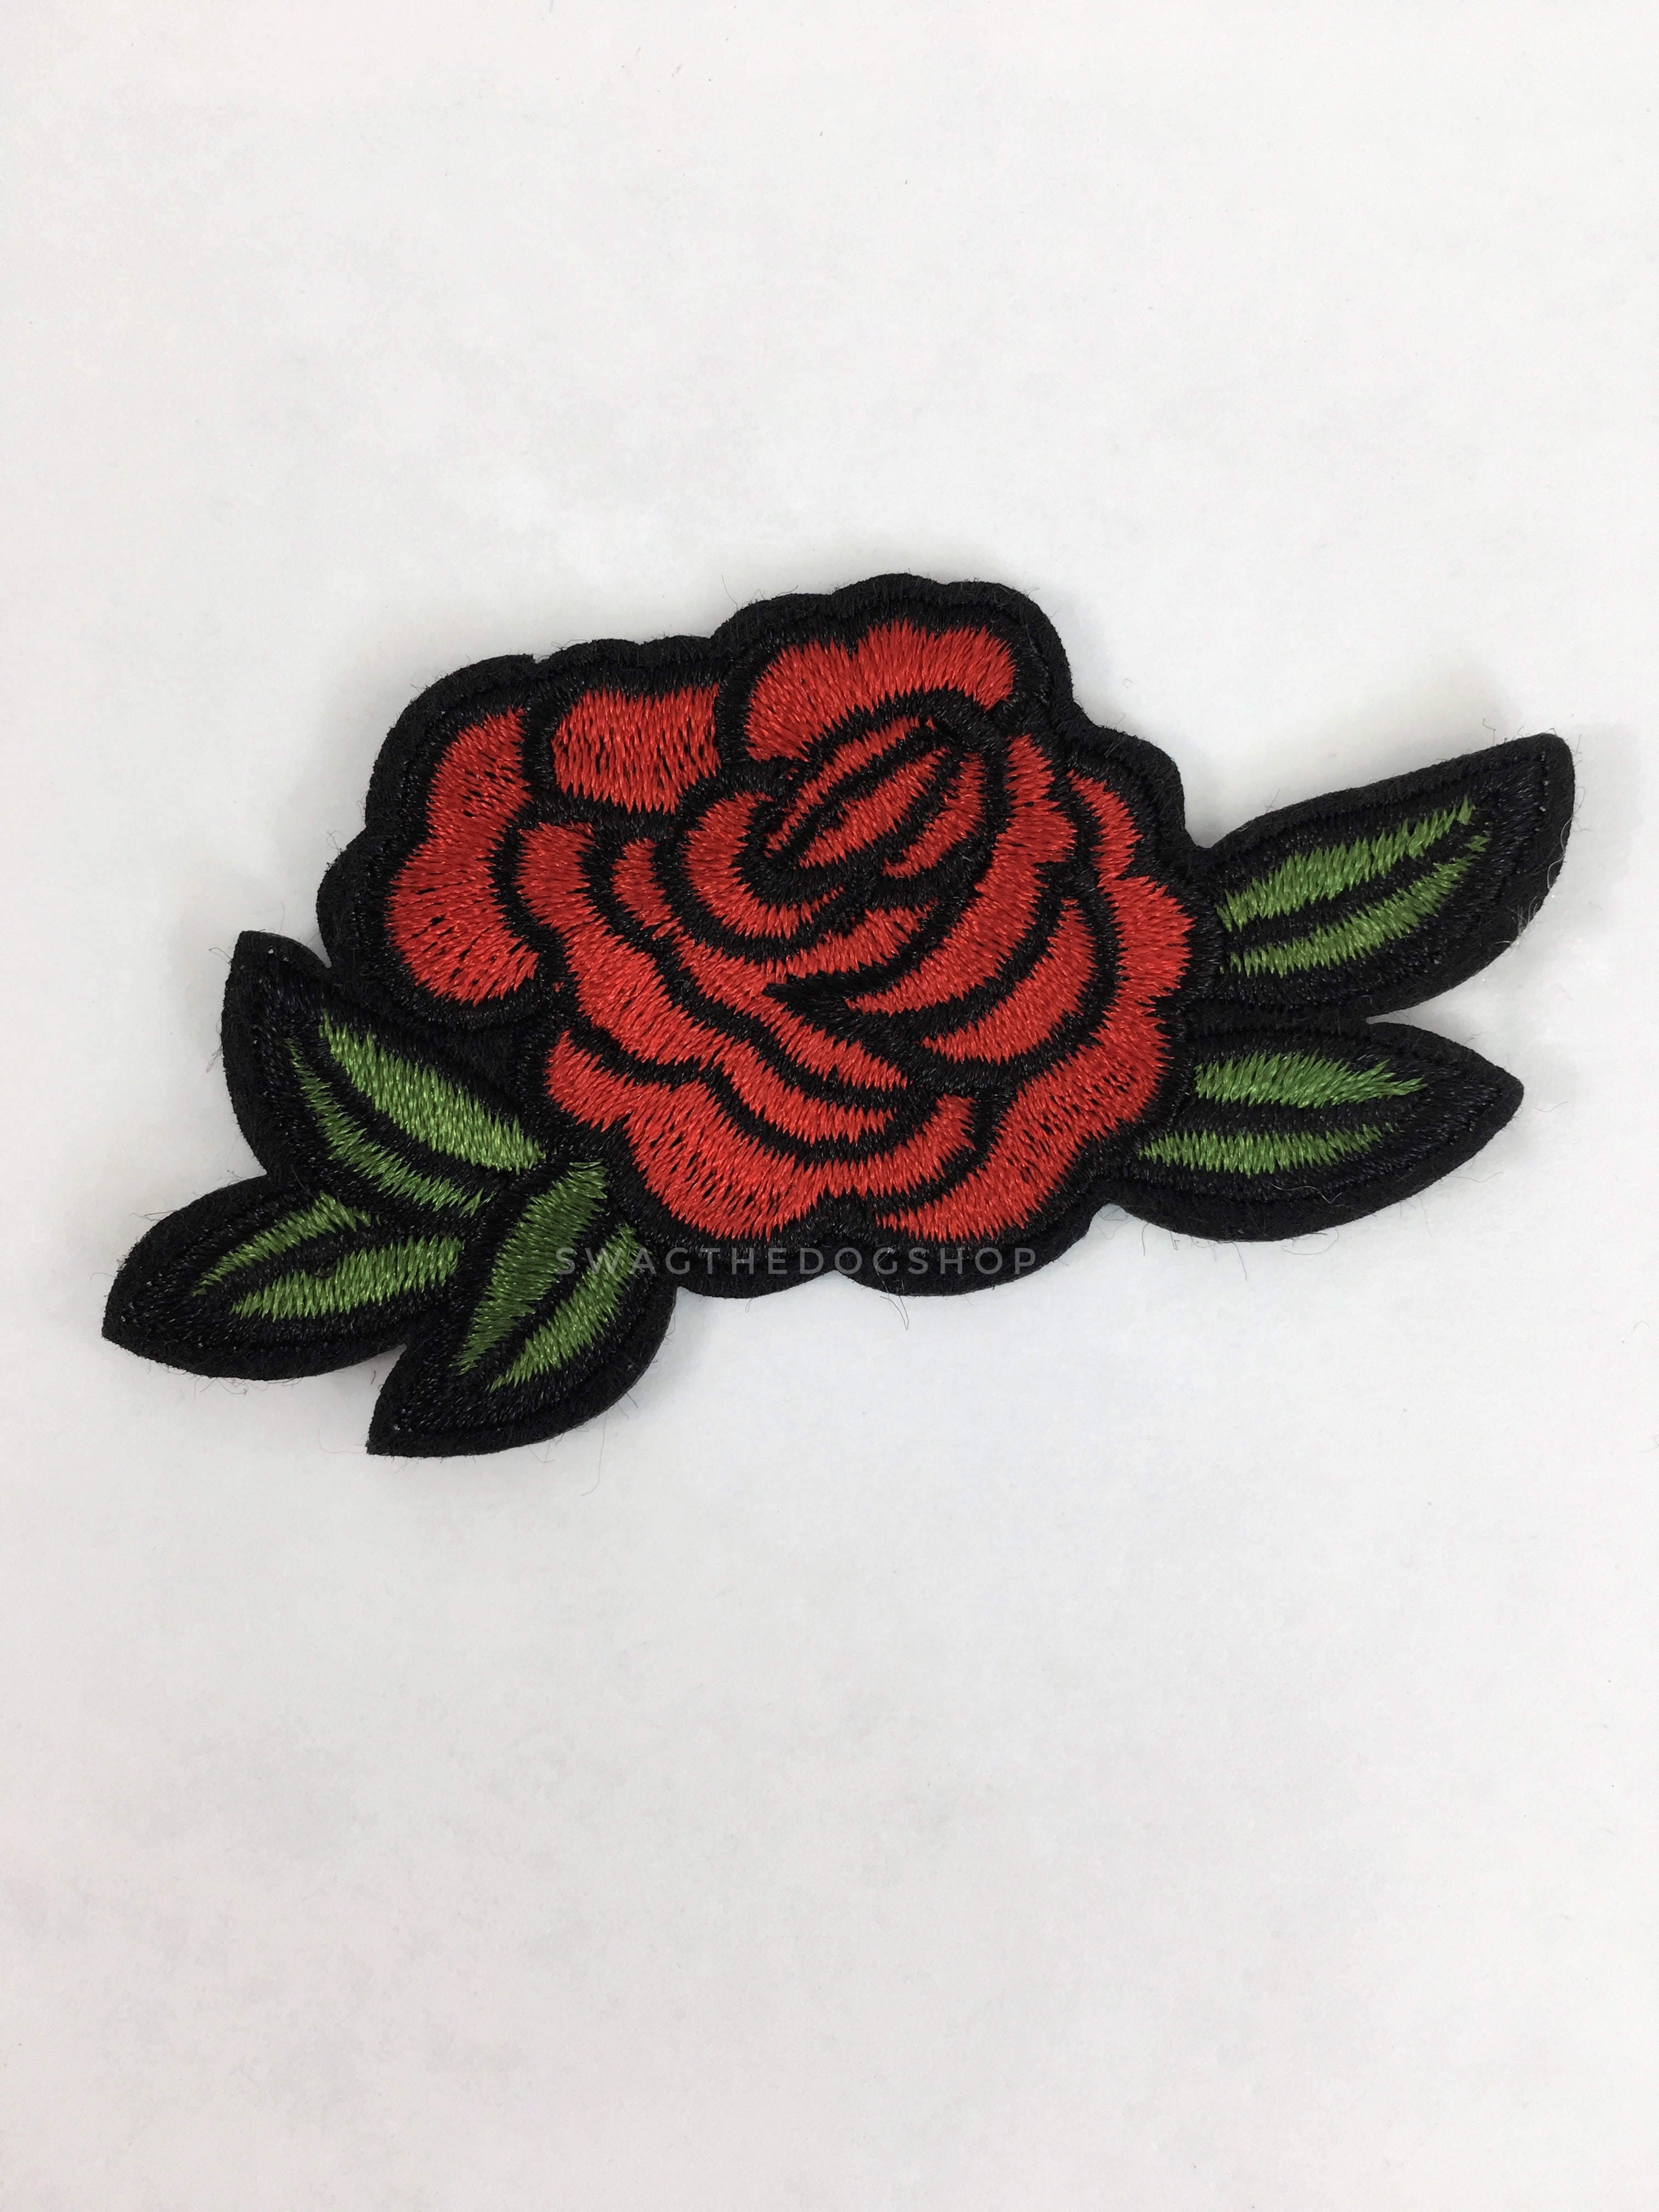 Patch Add-on - Roses 3